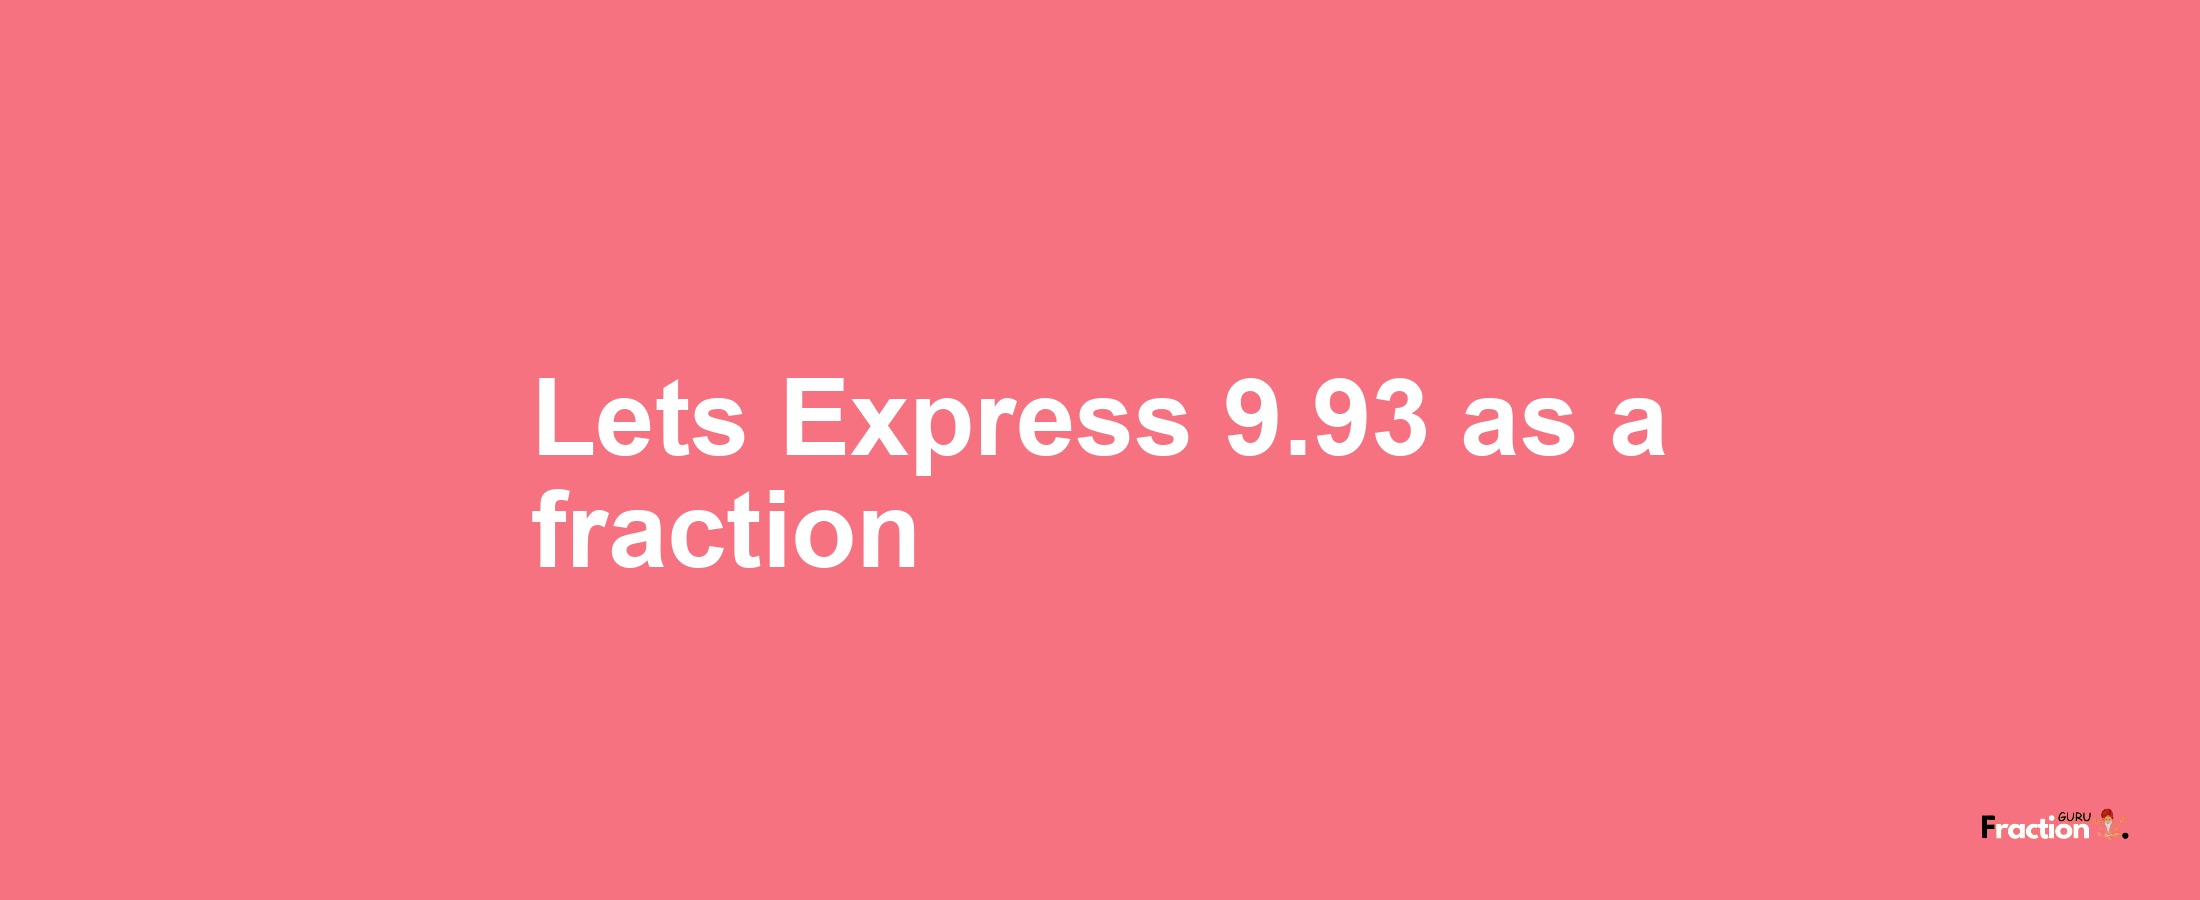 Lets Express 9.93 as afraction